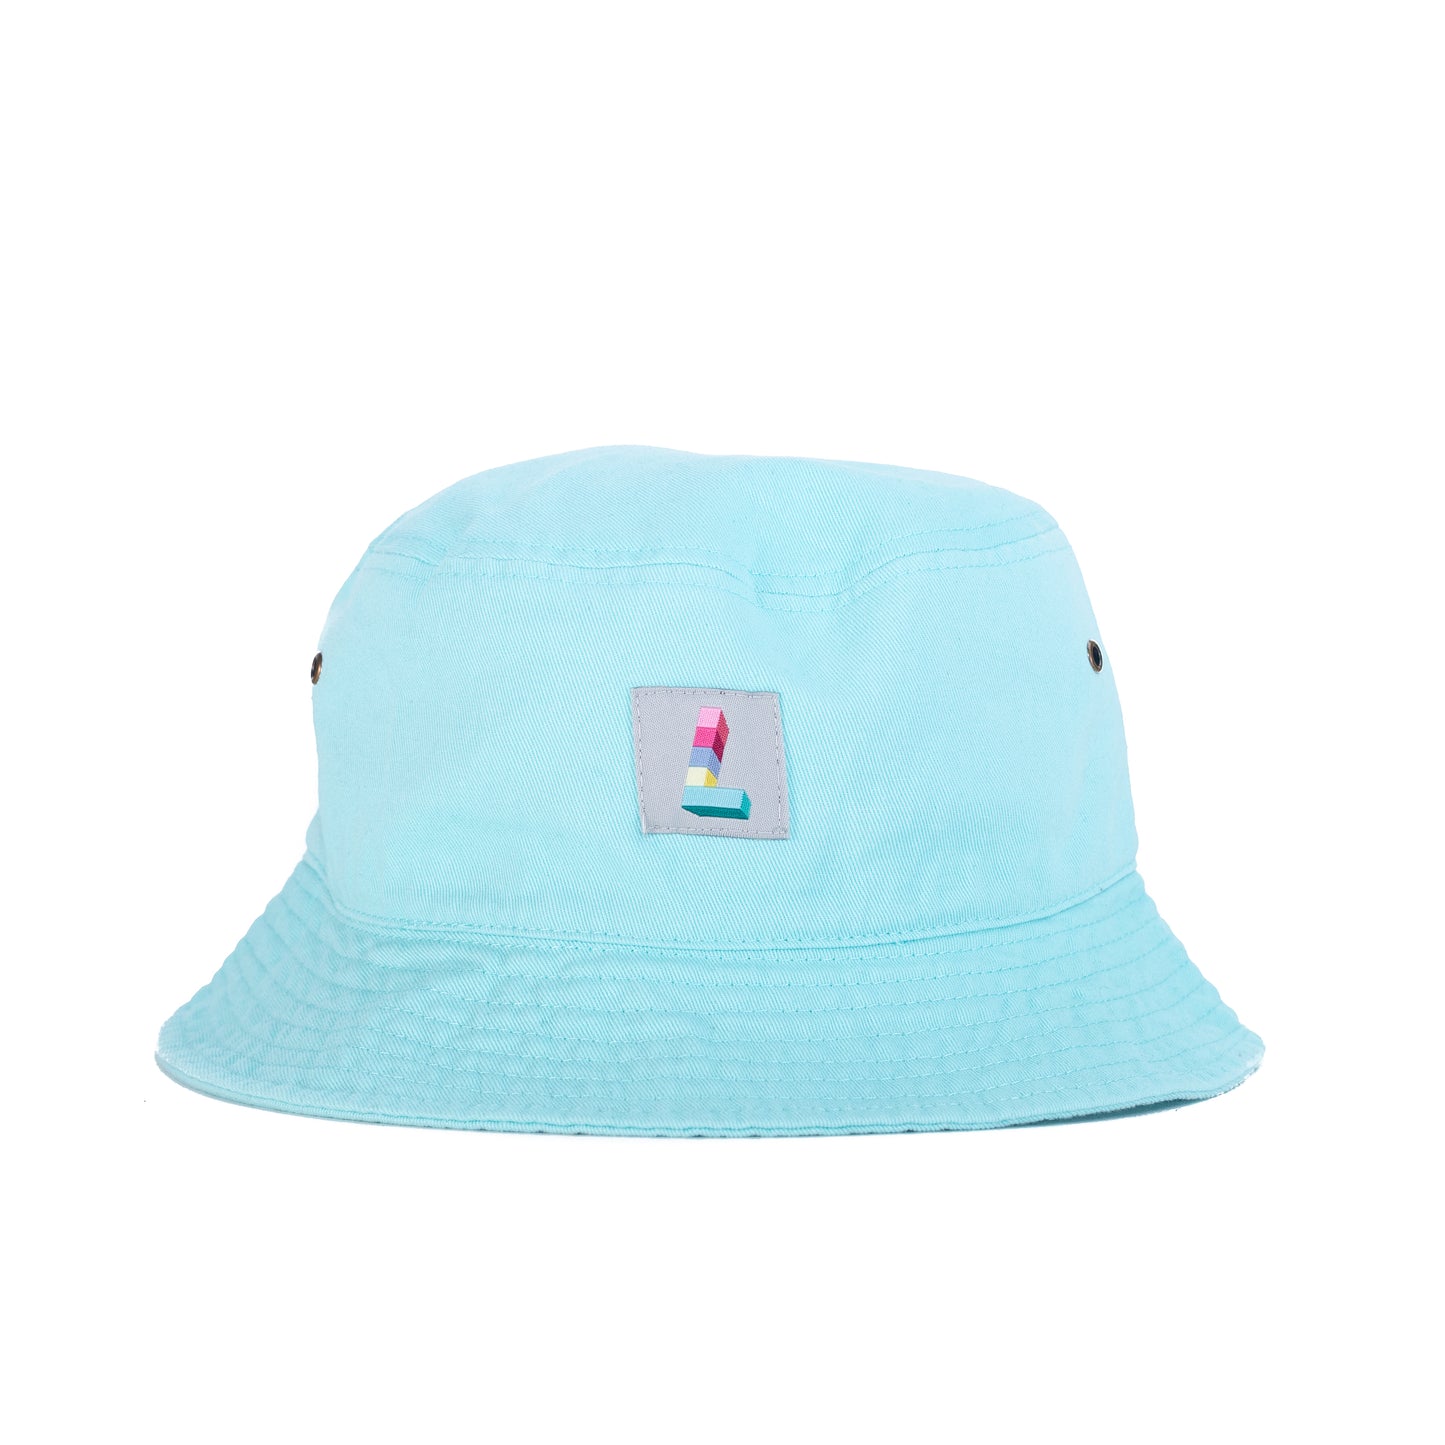 Work Patch Bucket, Light Teal - Layr Official